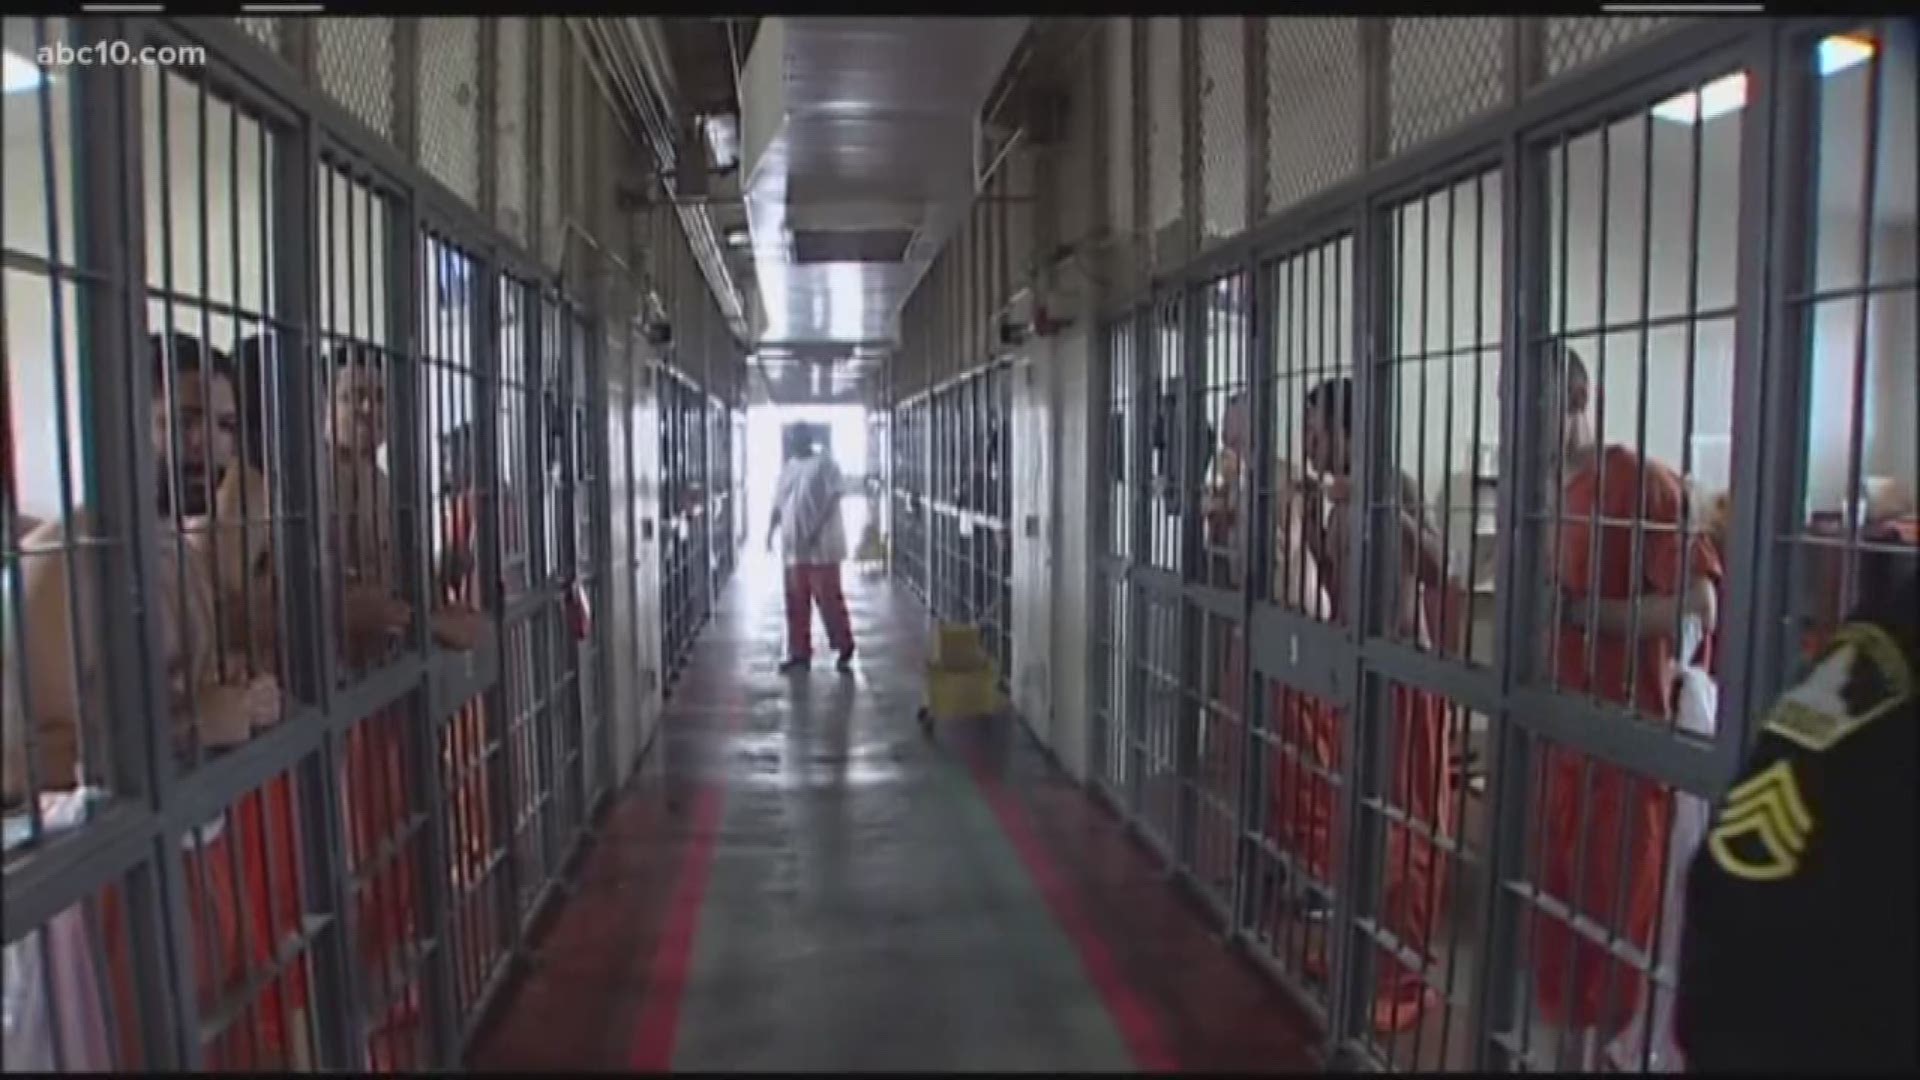 The 737 inmates on the largest death row in the nation got a reprieve from California Gov. Gavin Newsom on Wednesday when he signed an executive order placing a moratorium on executions.